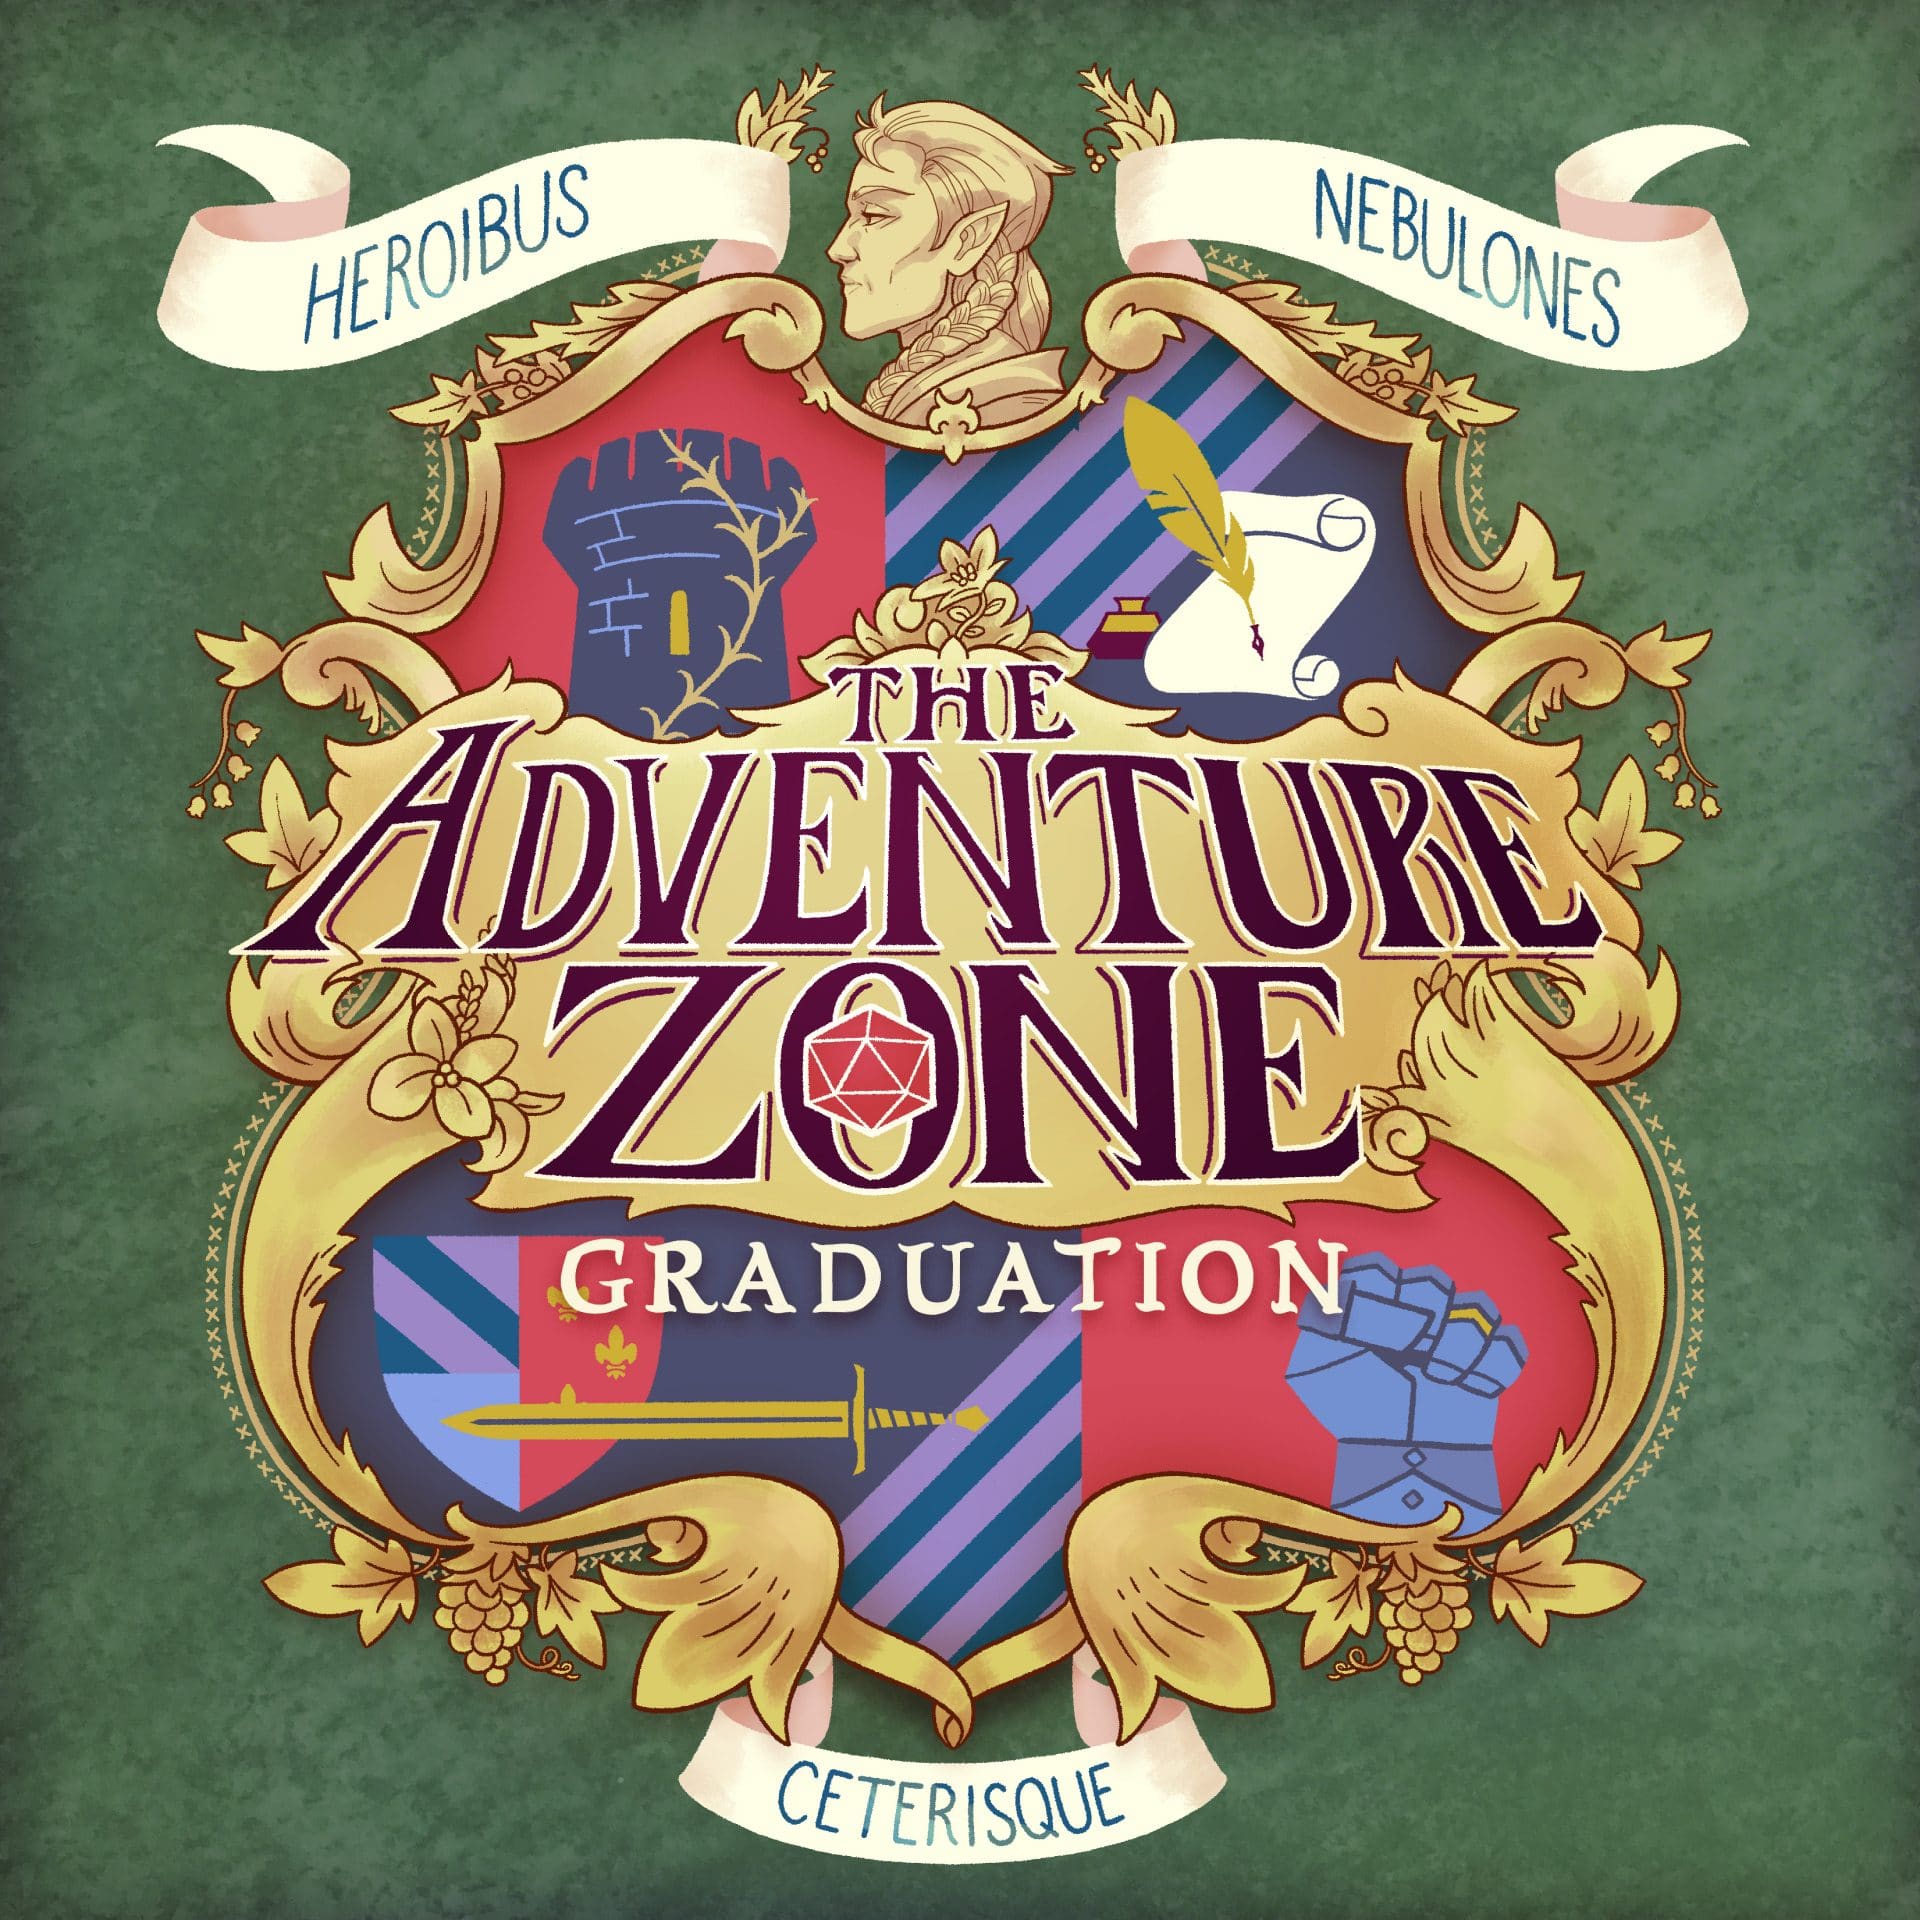 The Adventure Zone: Graduation logo. (The McElroy Family, 2019)